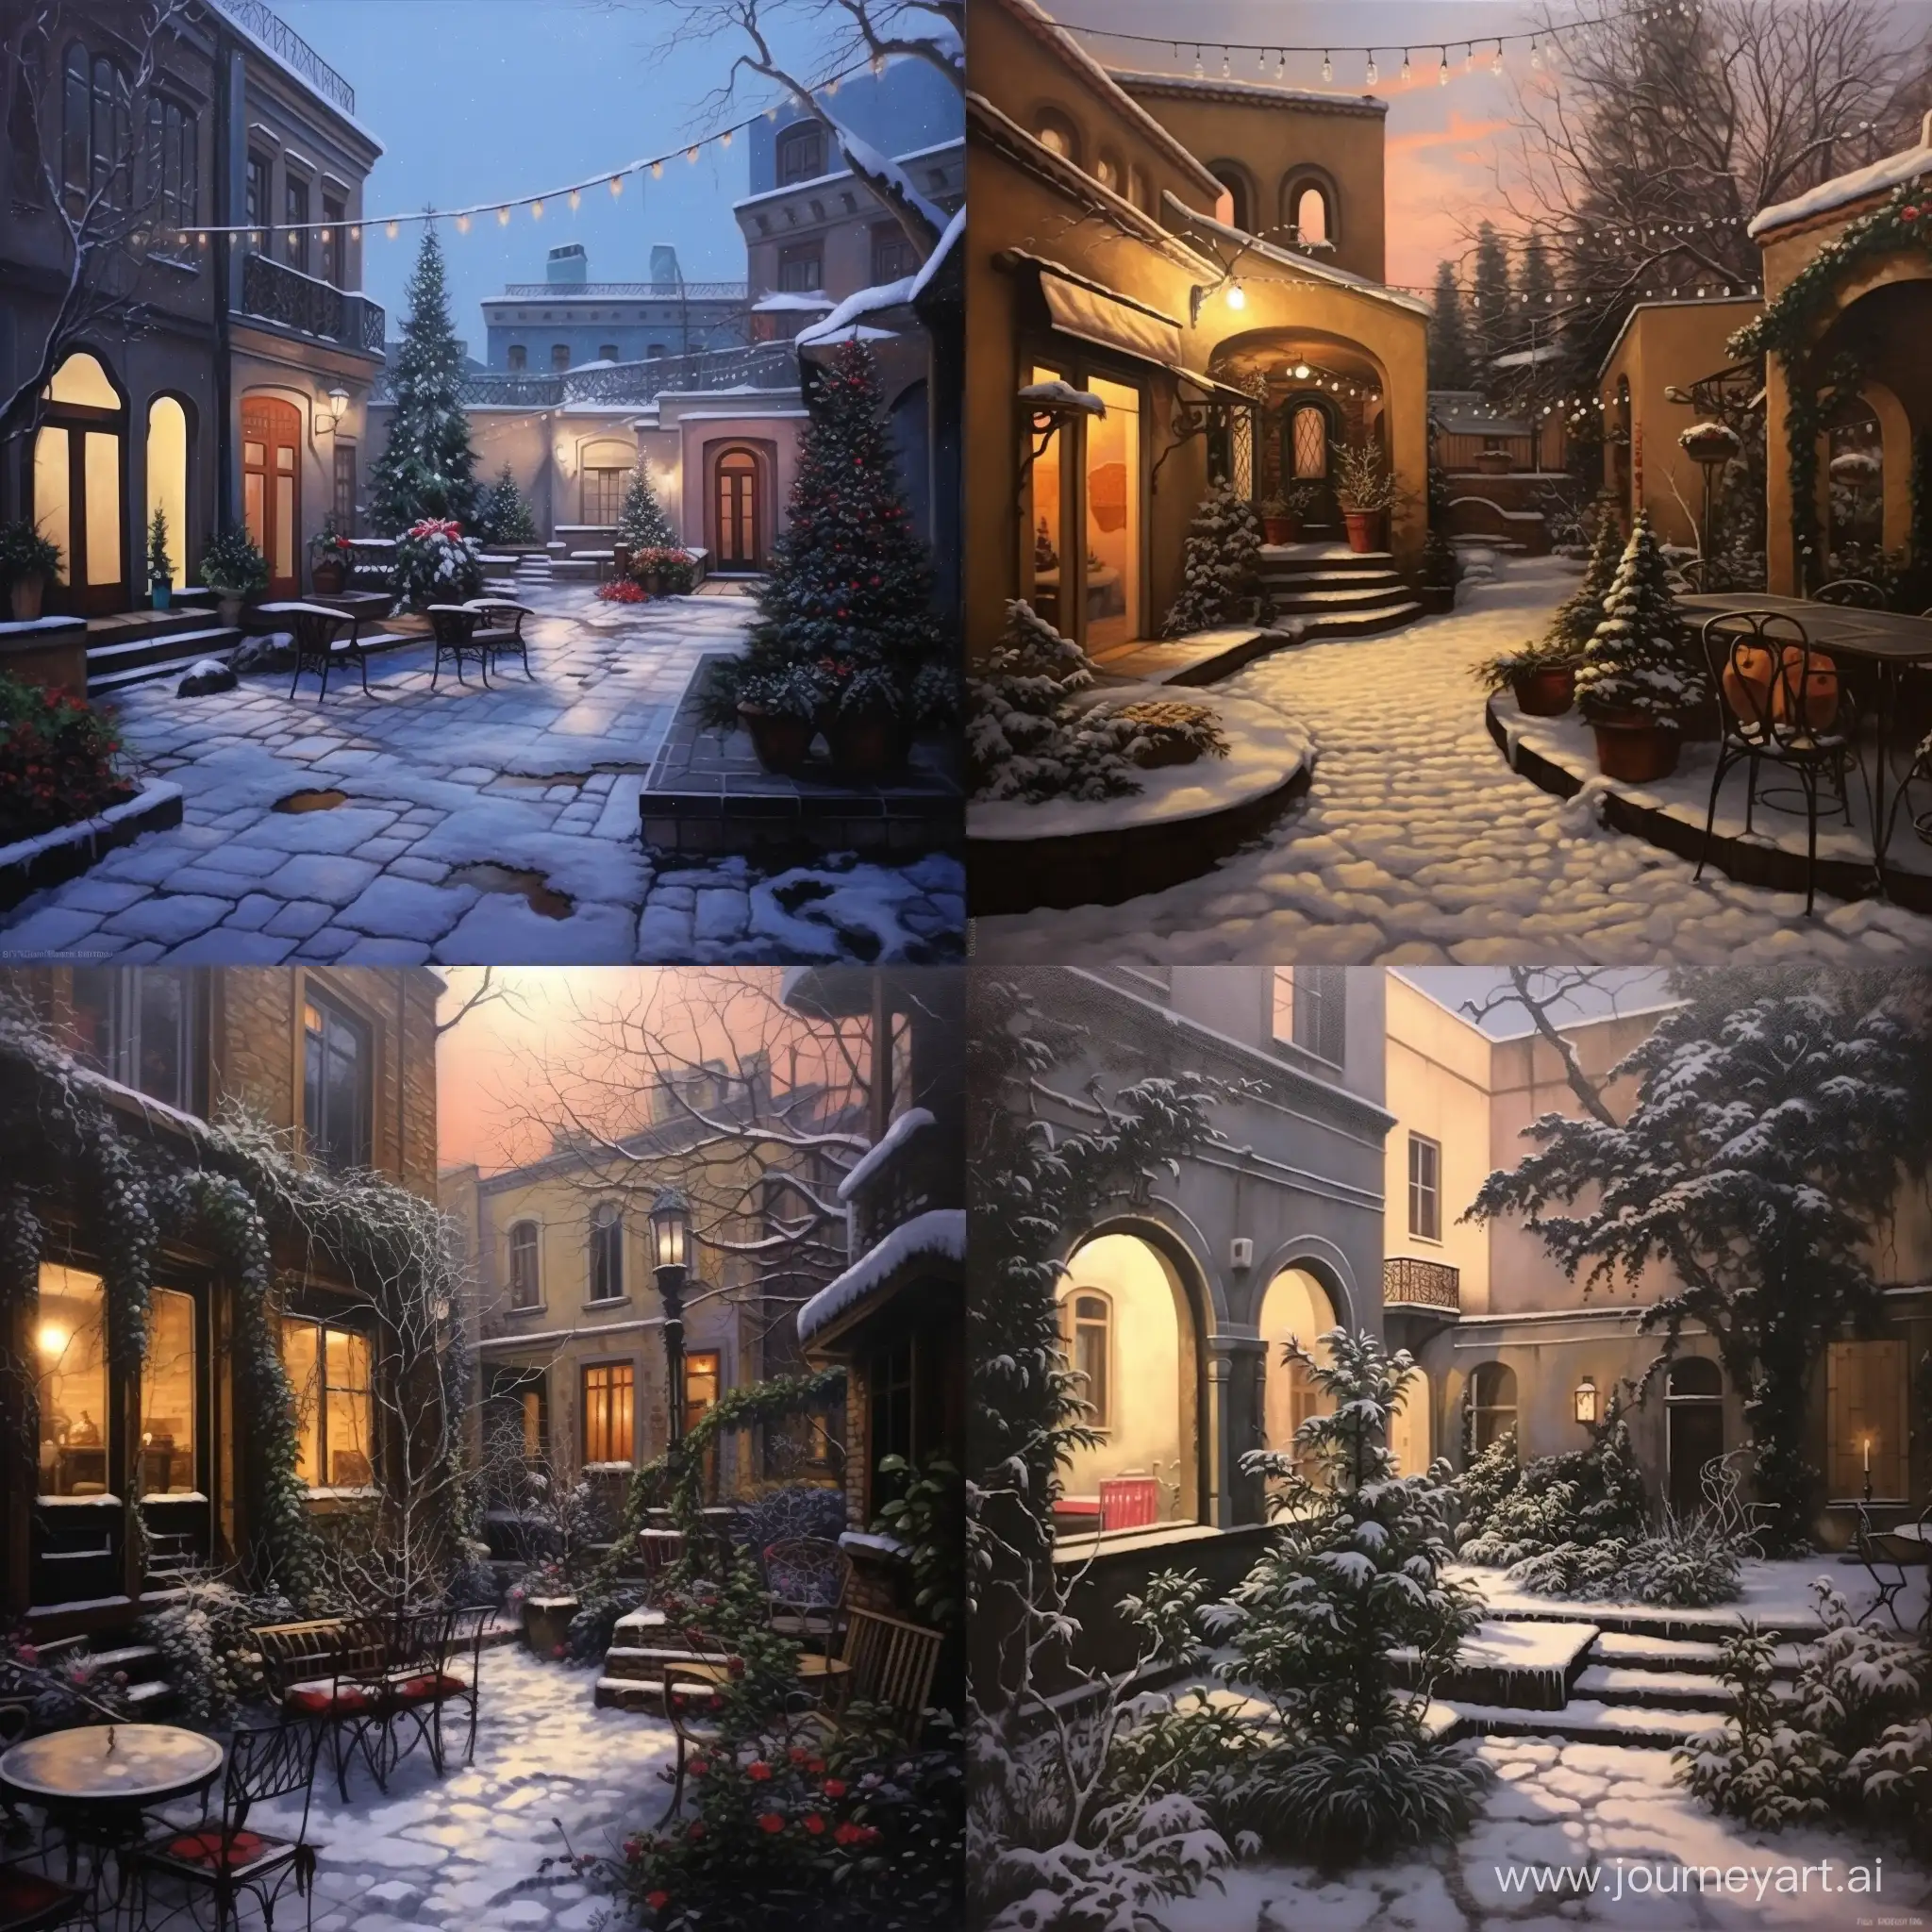 St-Petersburg-Winter-Evening-Courtyard-with-a-Well-Photorealistic-Scene